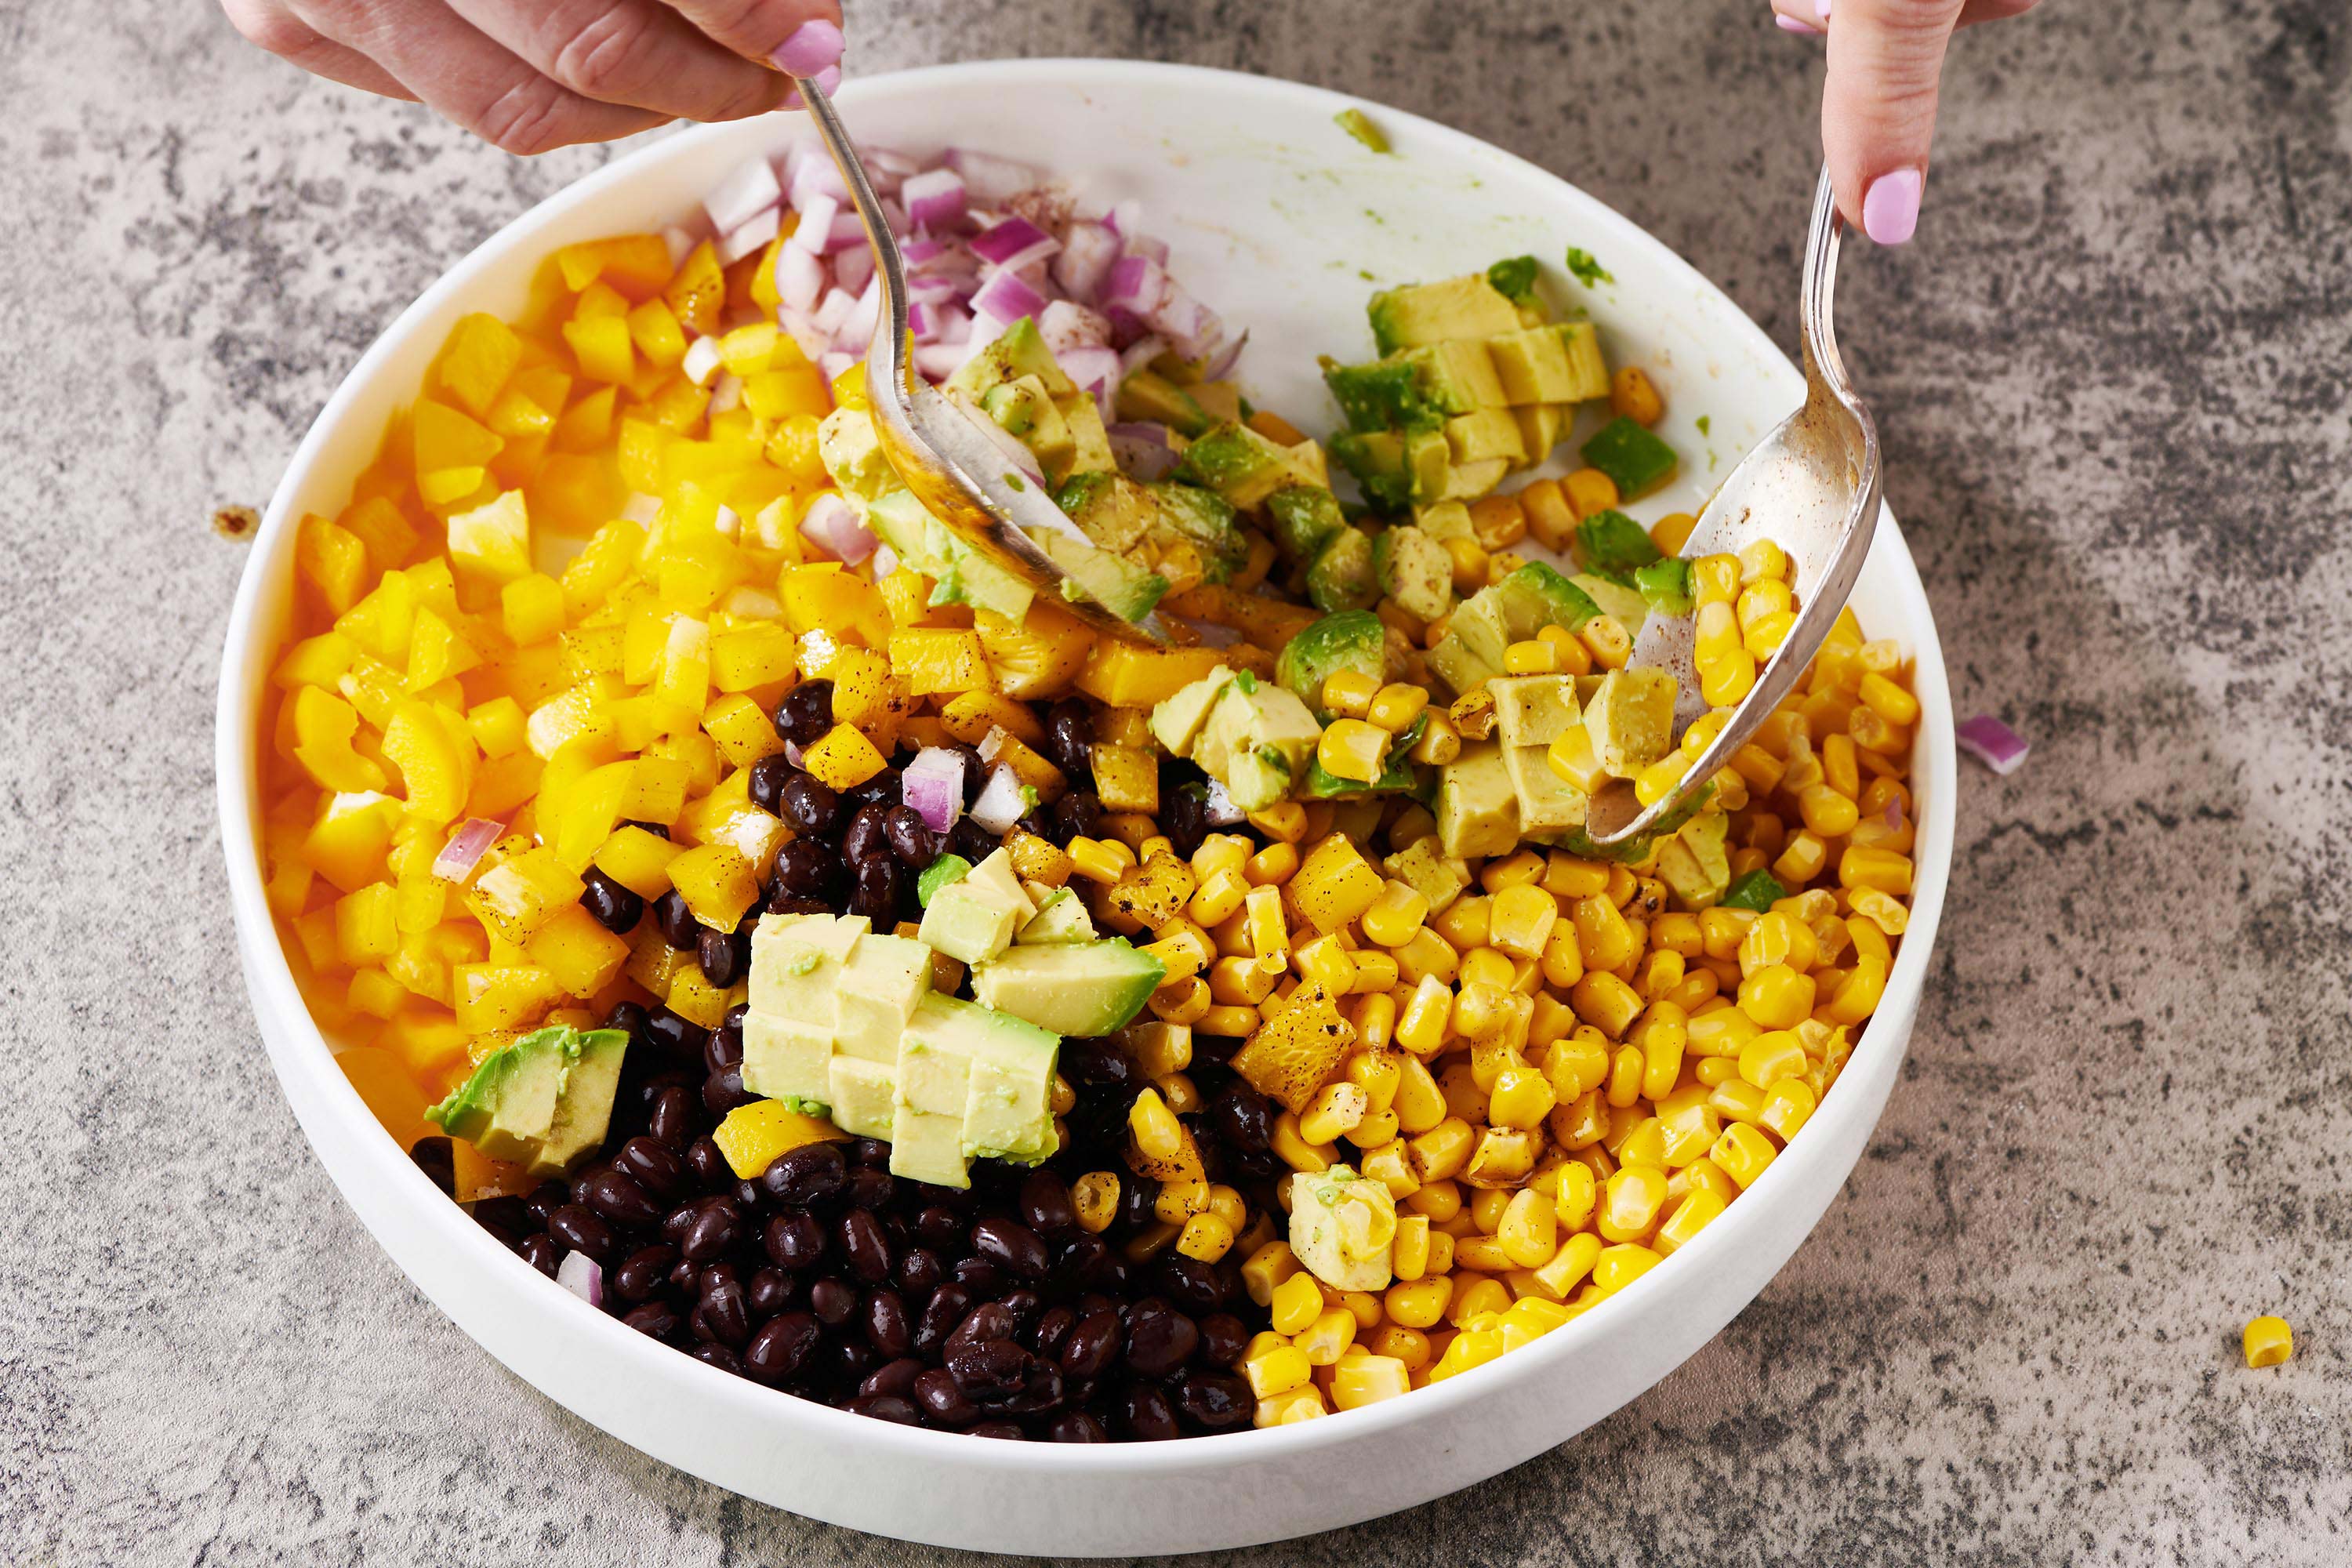 Woman using spoons to mix red onion, avocado, corn, and other ingredients for cowboy caviar.